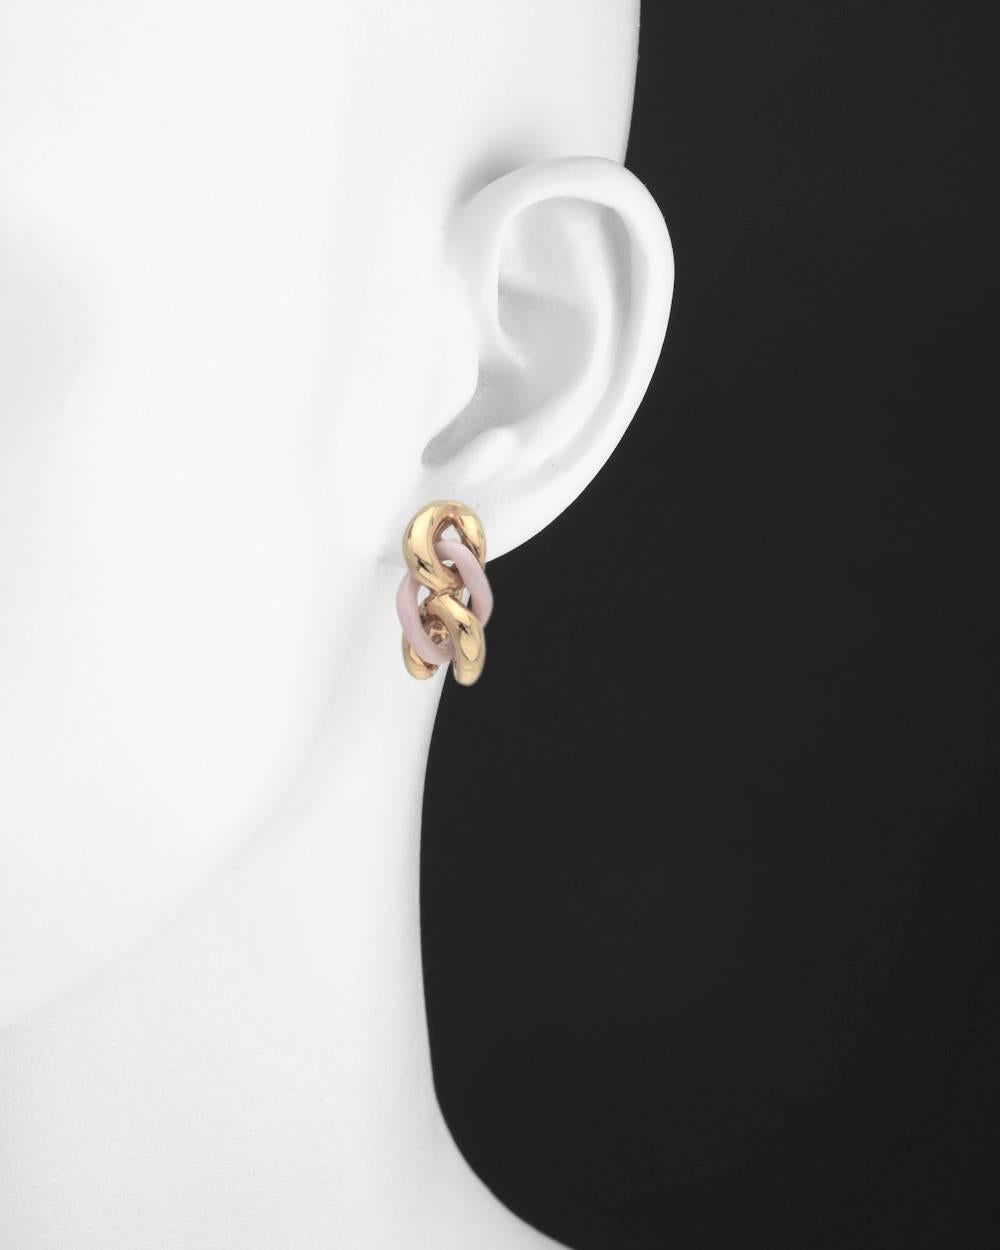 Three link earrings, centering a carved pink ceramic link flanked by links in high-polished 18k rose gold. Clip backs with posts. 1